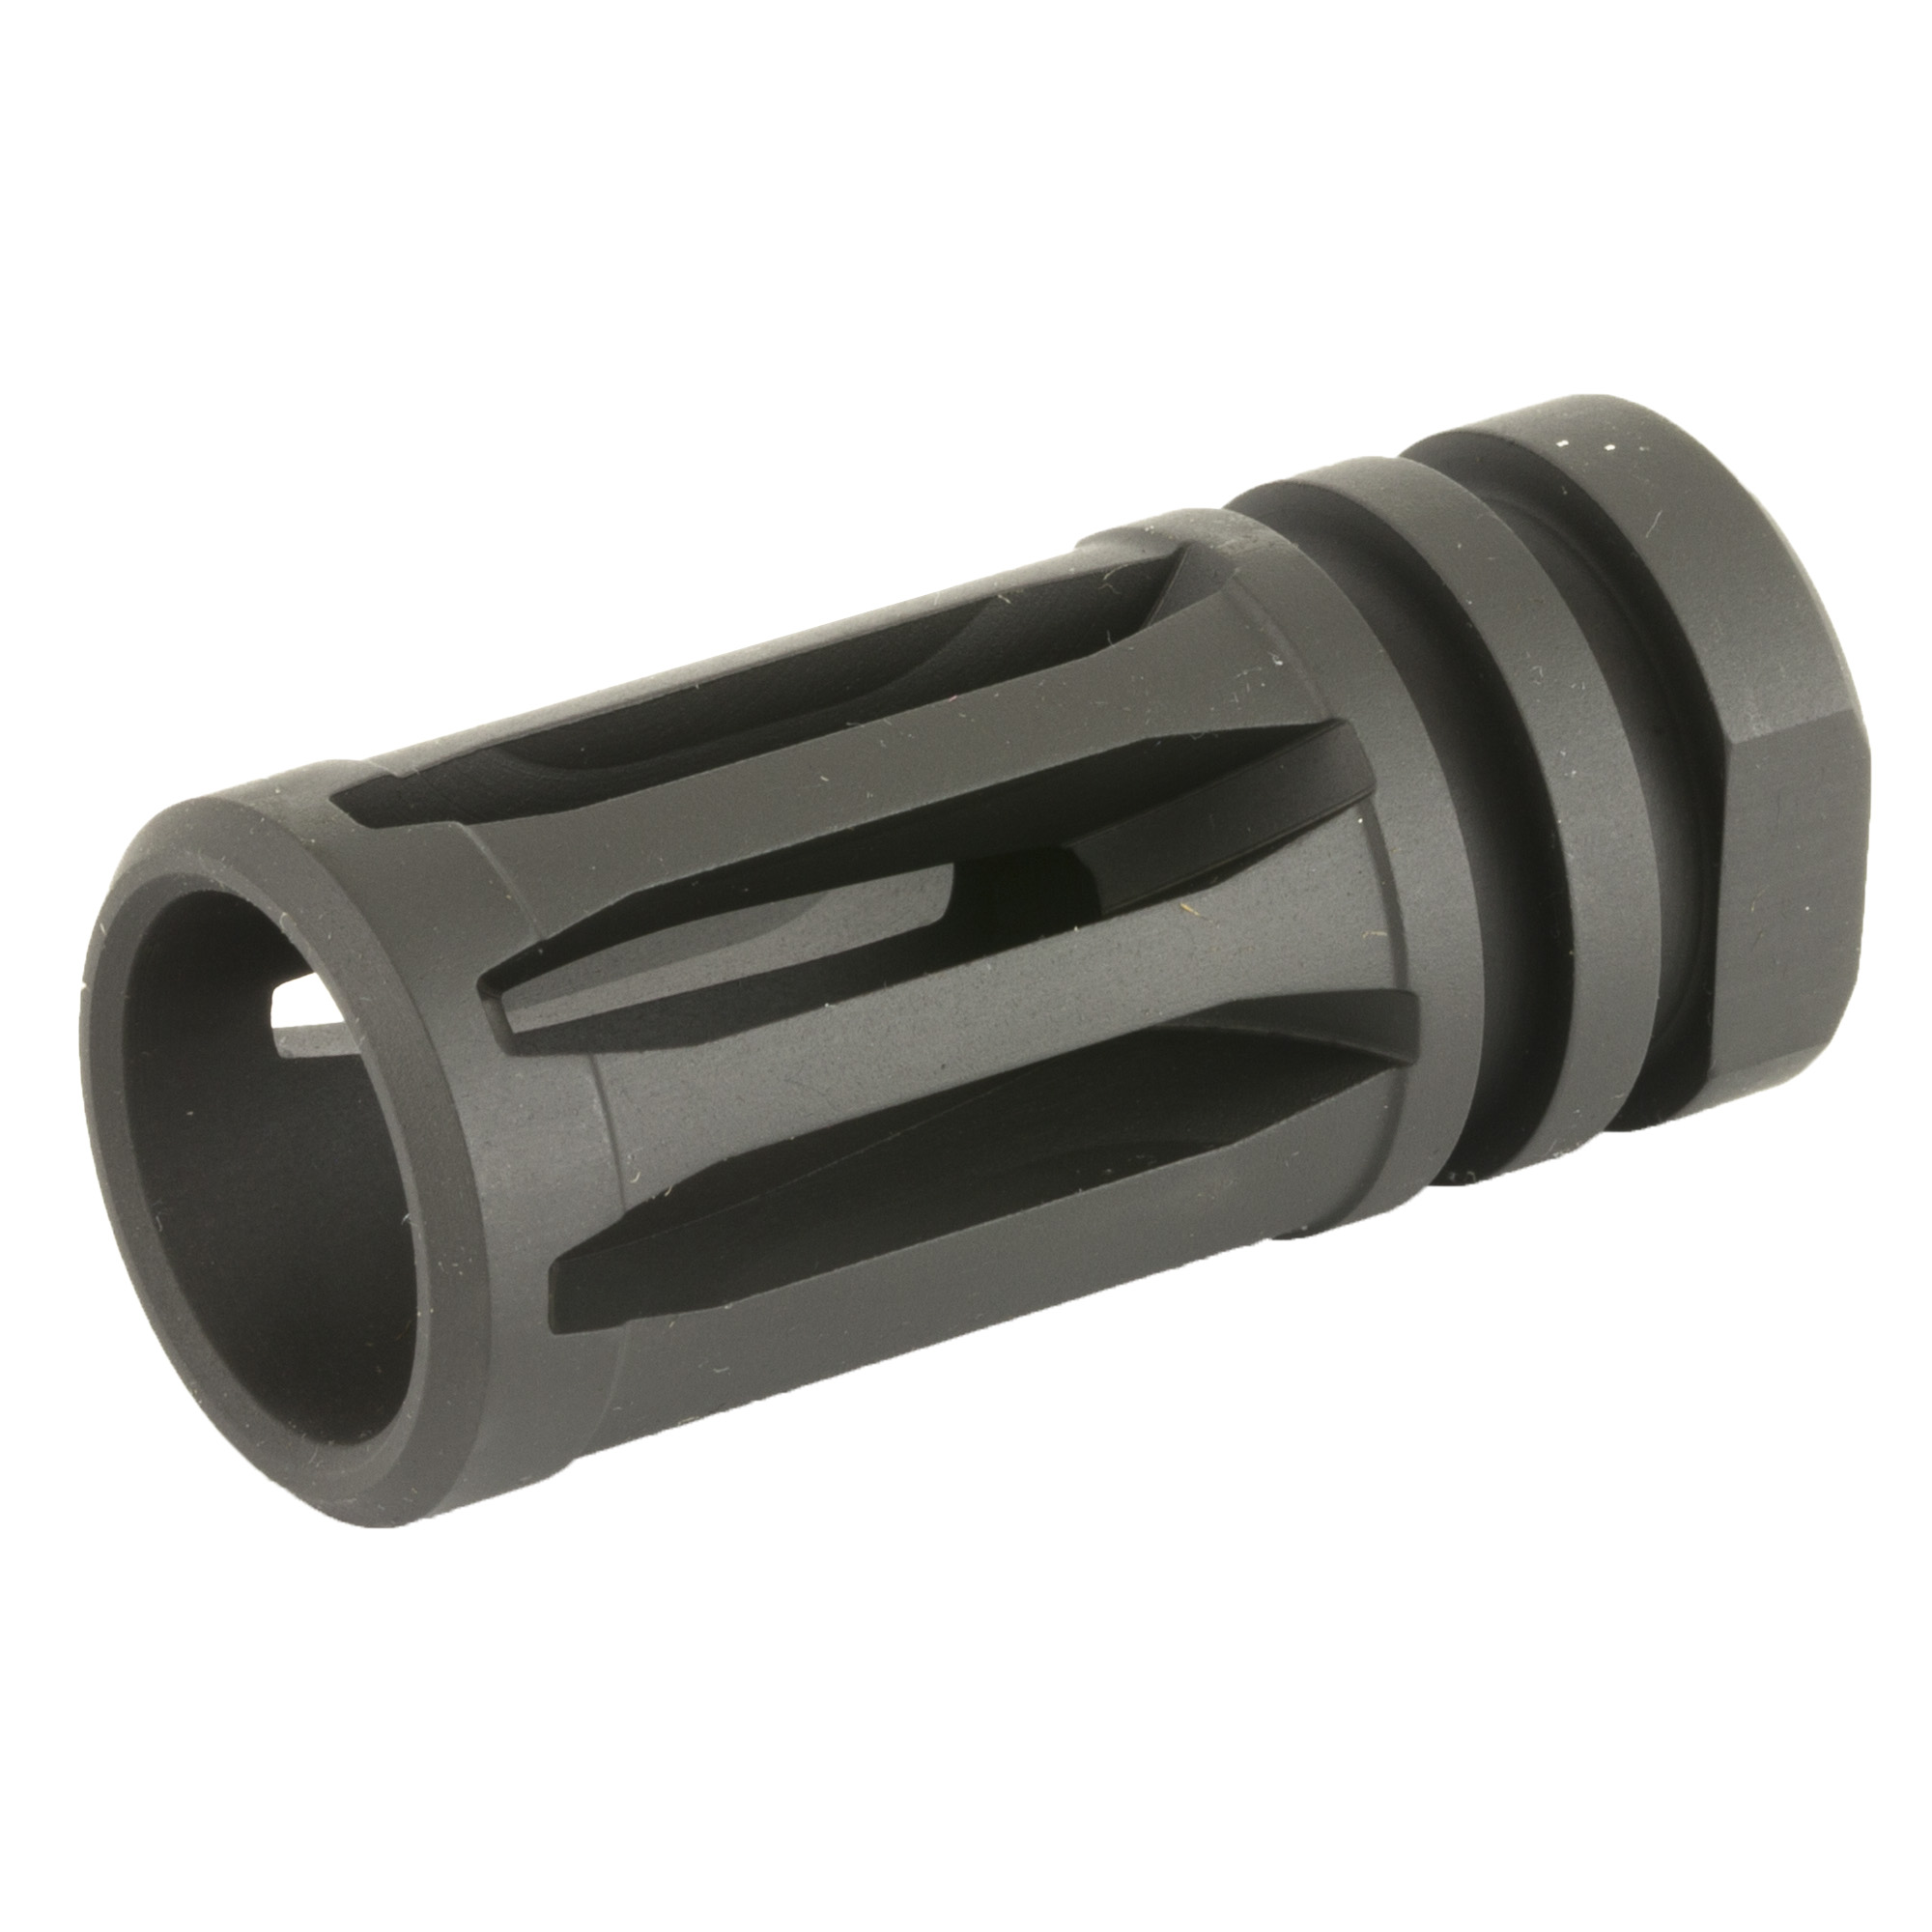 BCM - A2x Extended Flash Hider